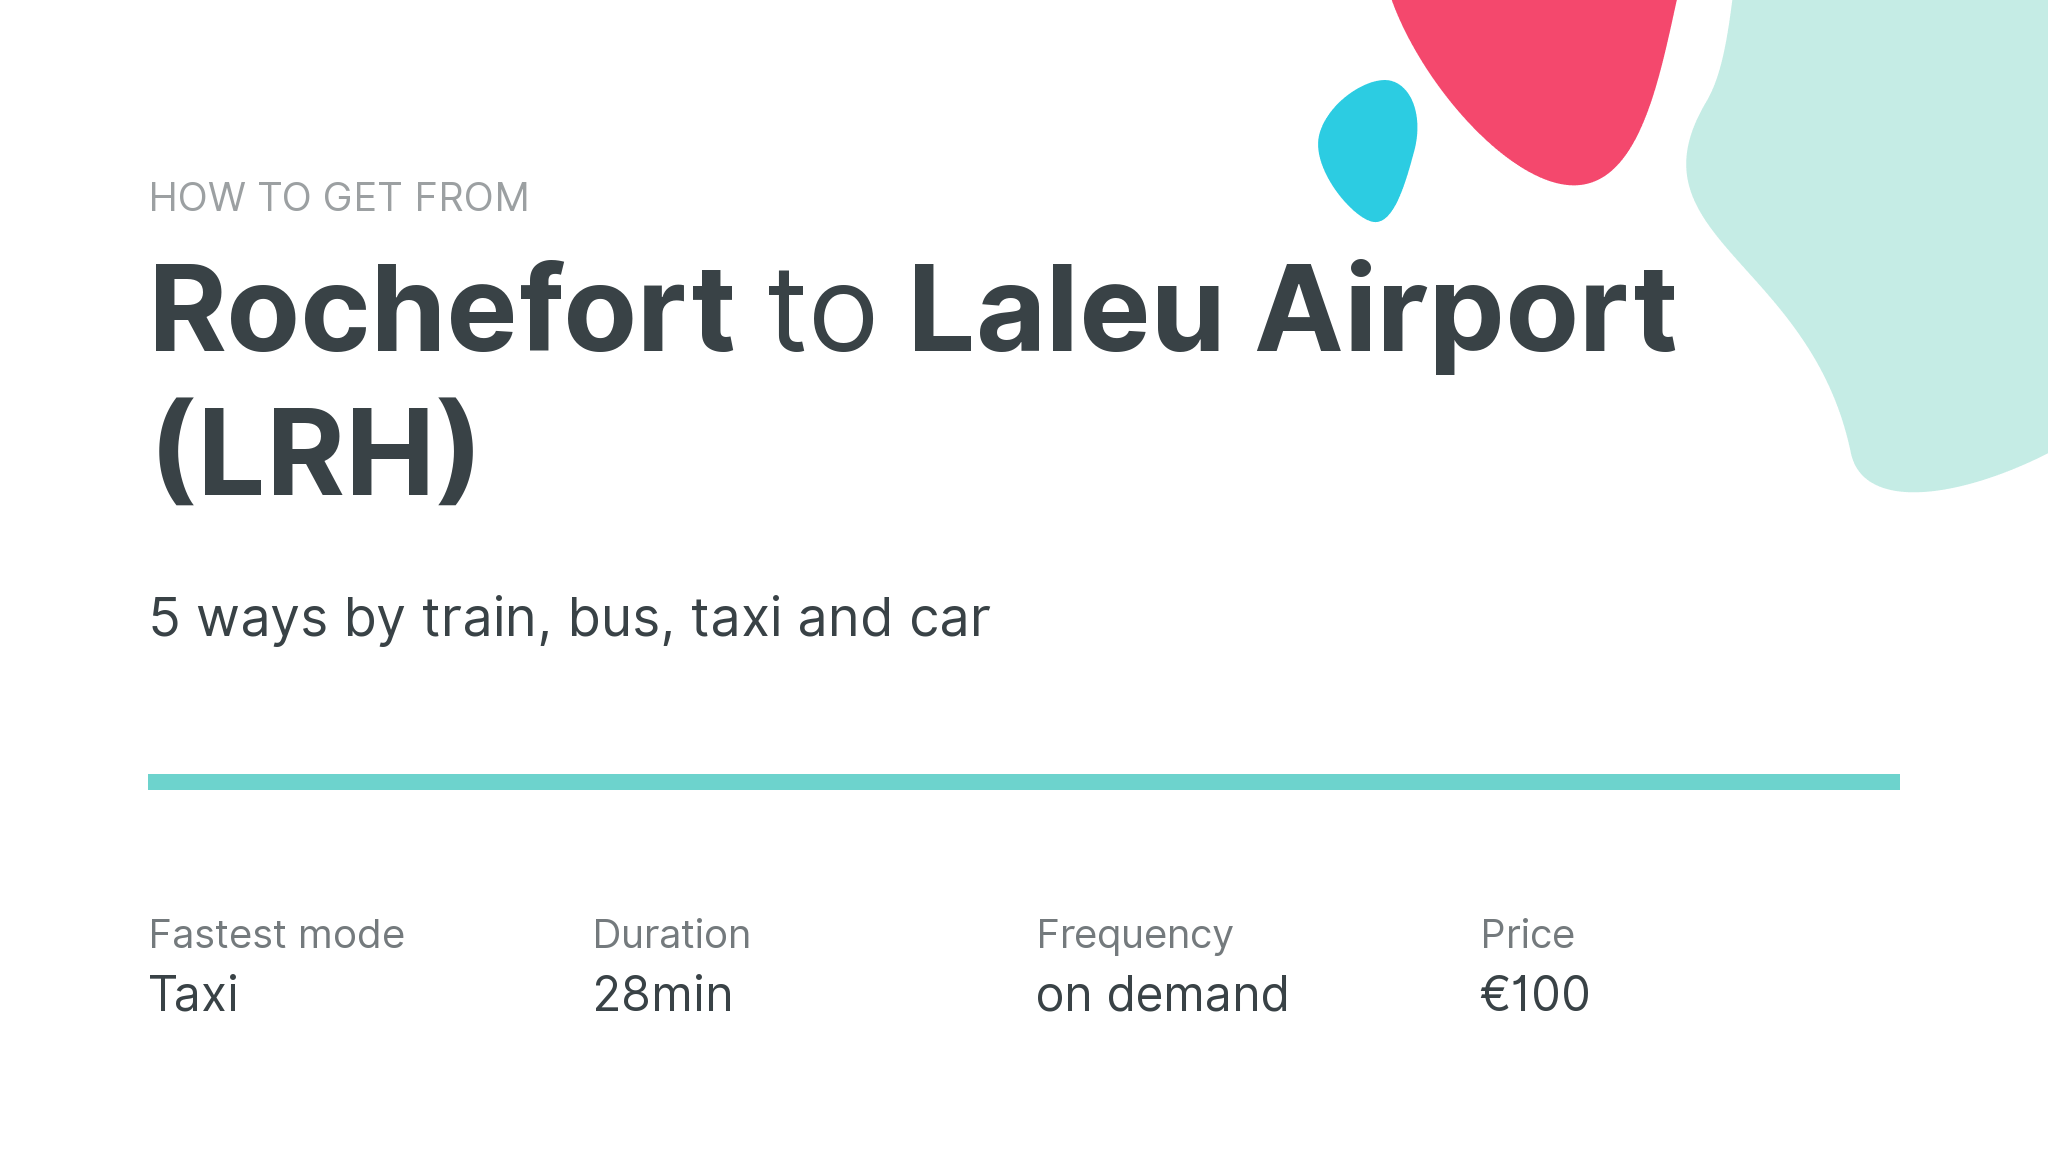 How do I get from Rochefort to Laleu Airport (LRH)